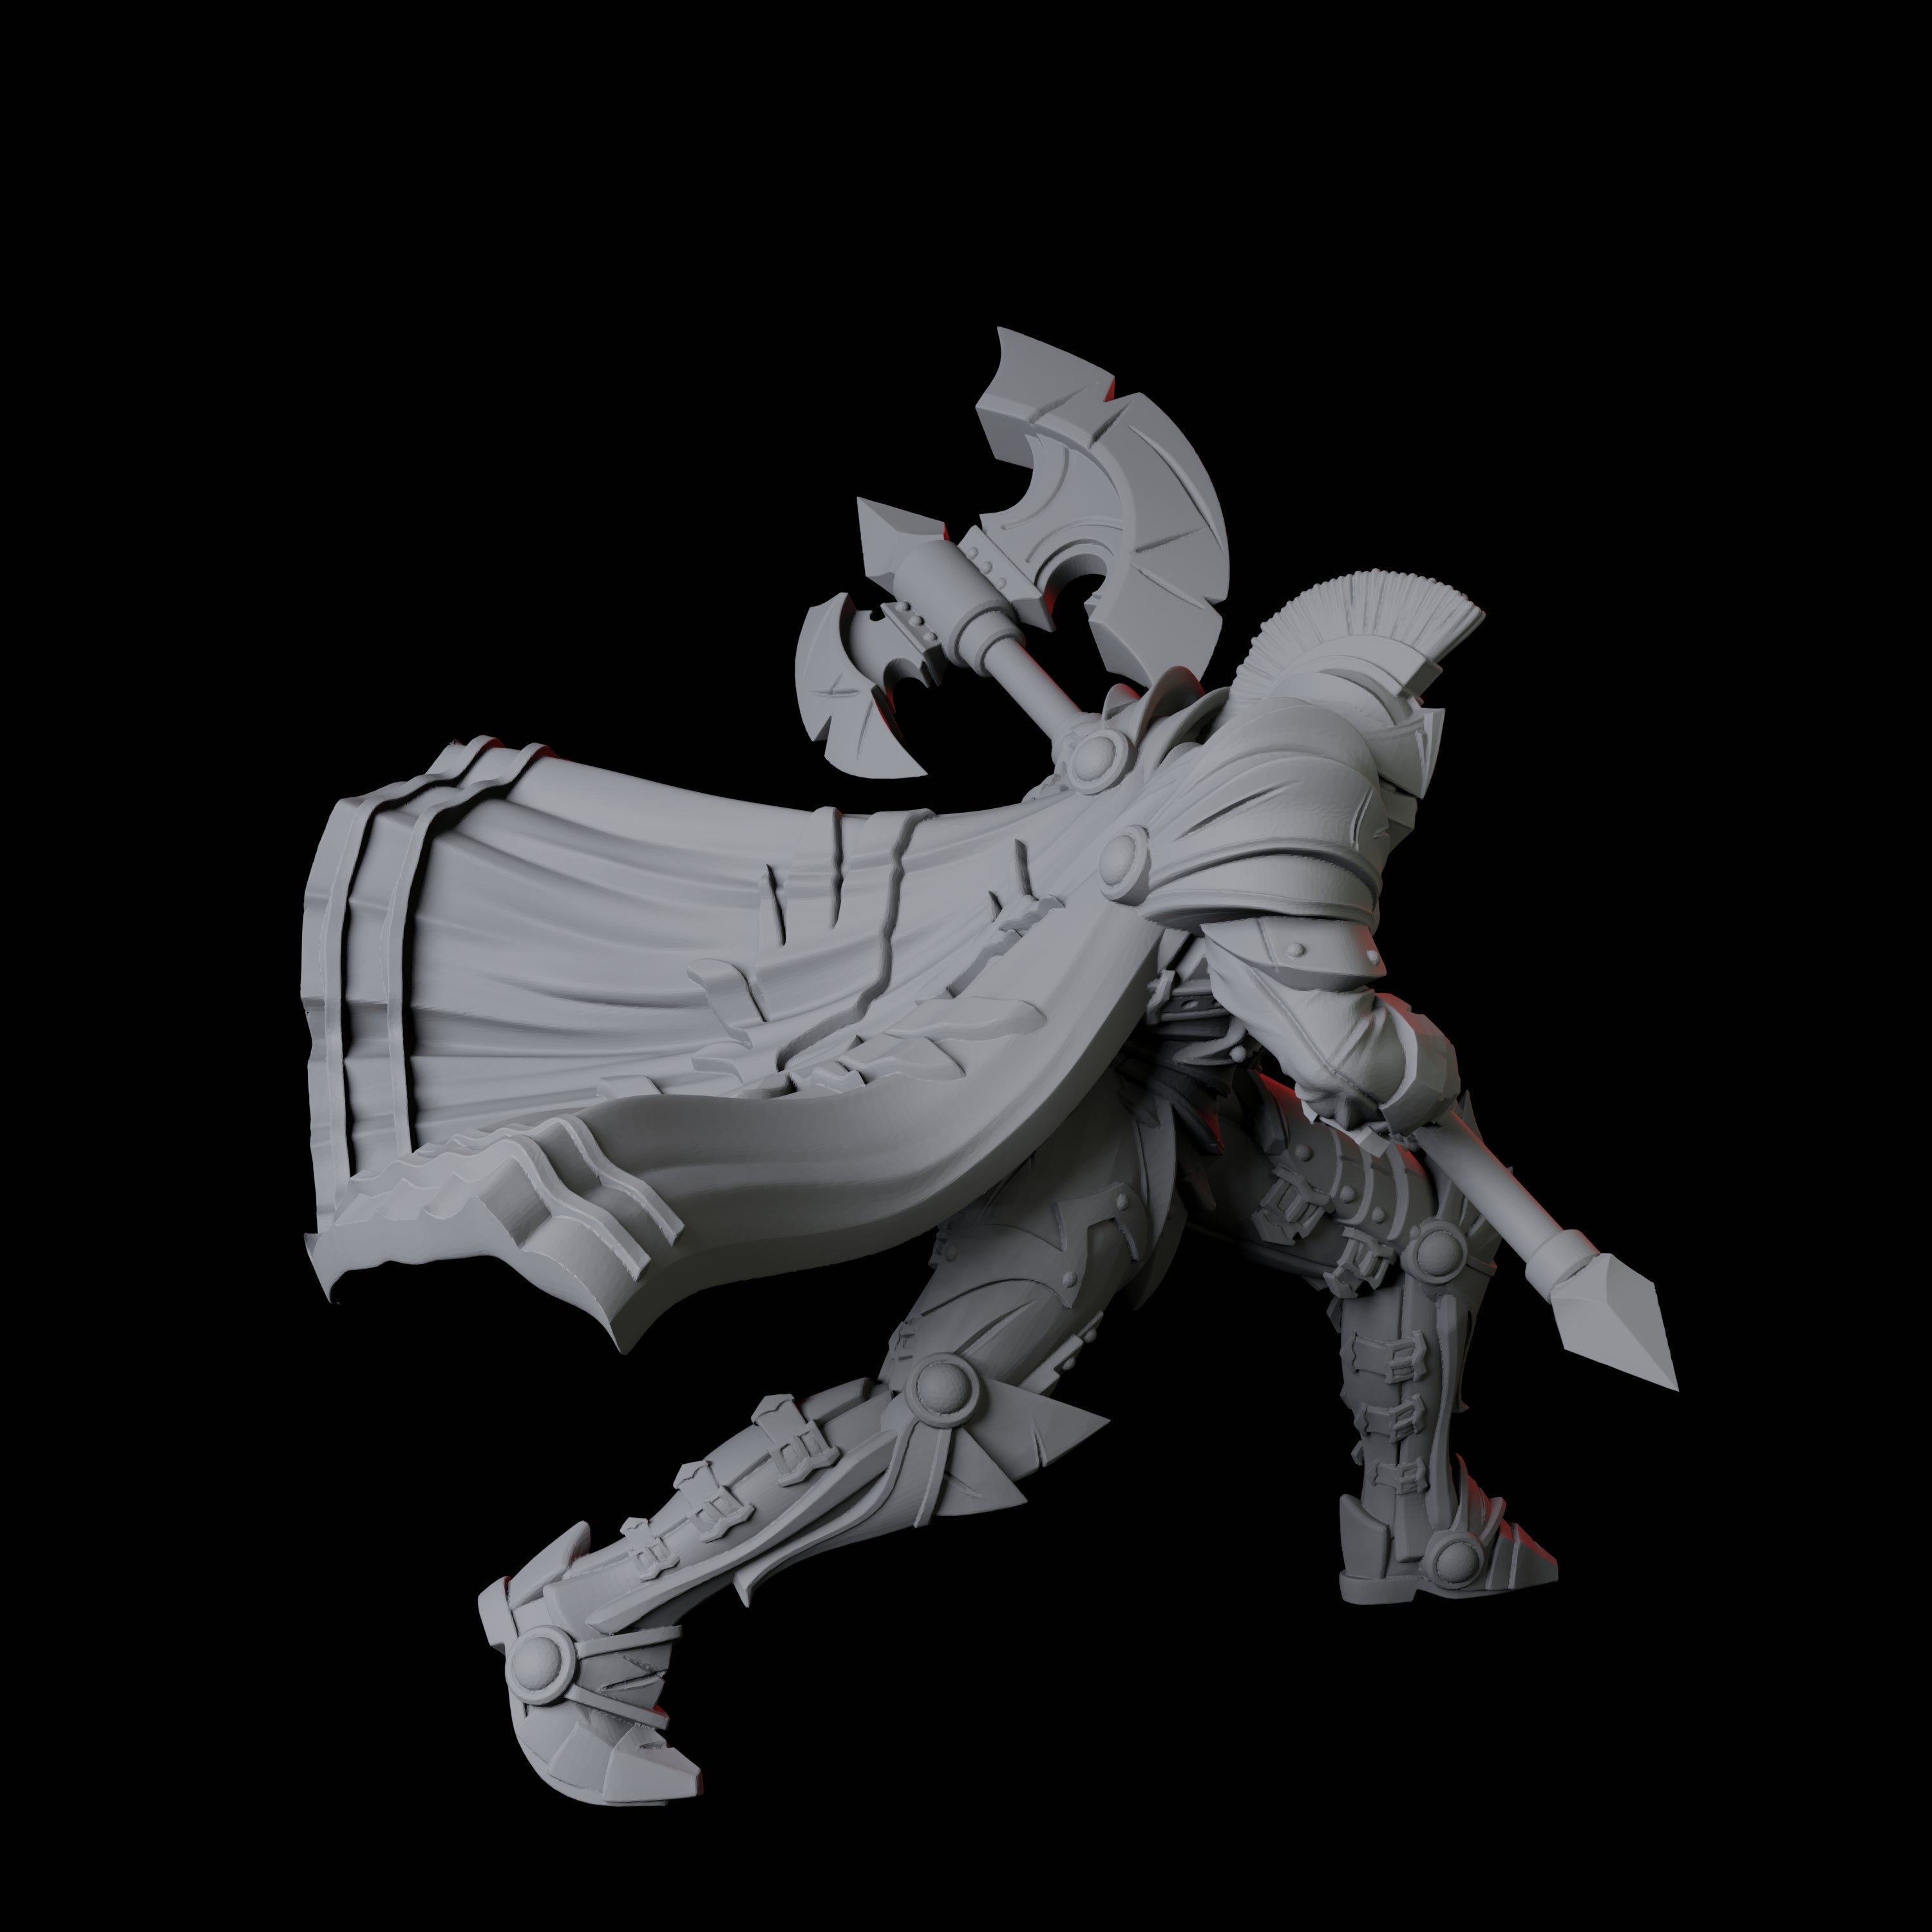 Axe-Wielding Knight B Miniature for Dungeons and Dragons, Pathfinder or other TTRPGs